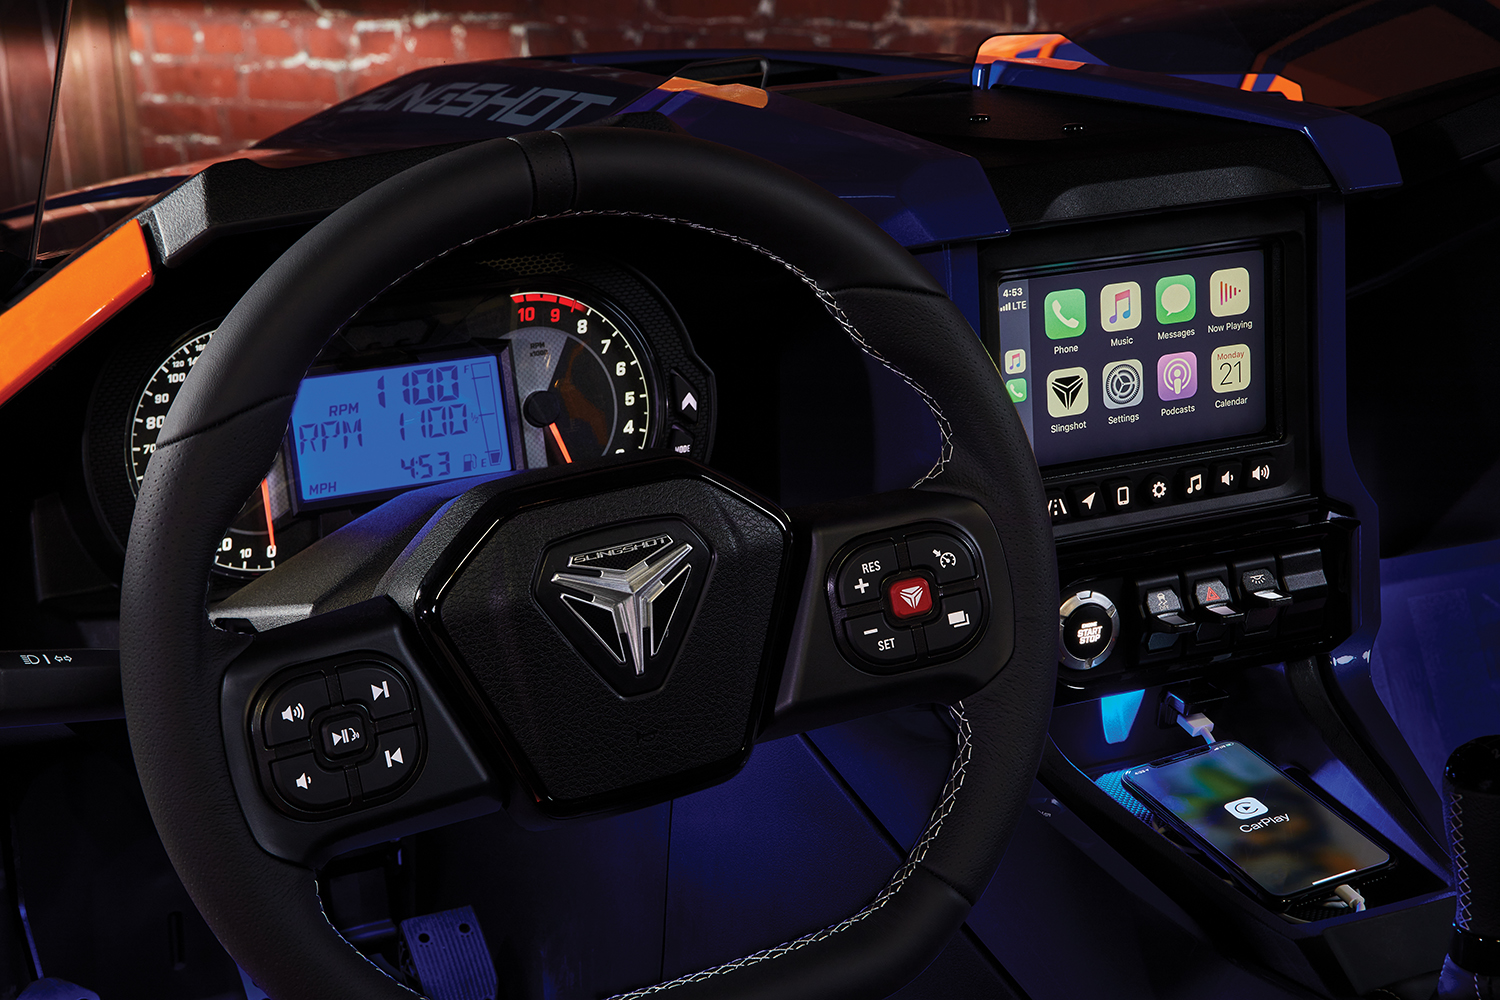 The Slingshot R models come standard with Apple CarPlay which integrates iPhone devices with the Slingshot's built-in infotainment system. As we've seen with many recent motorcycles WRN has reviewed, riders and passengers can make phone calls with a Bluetooth headset, access music, get directions, and more.